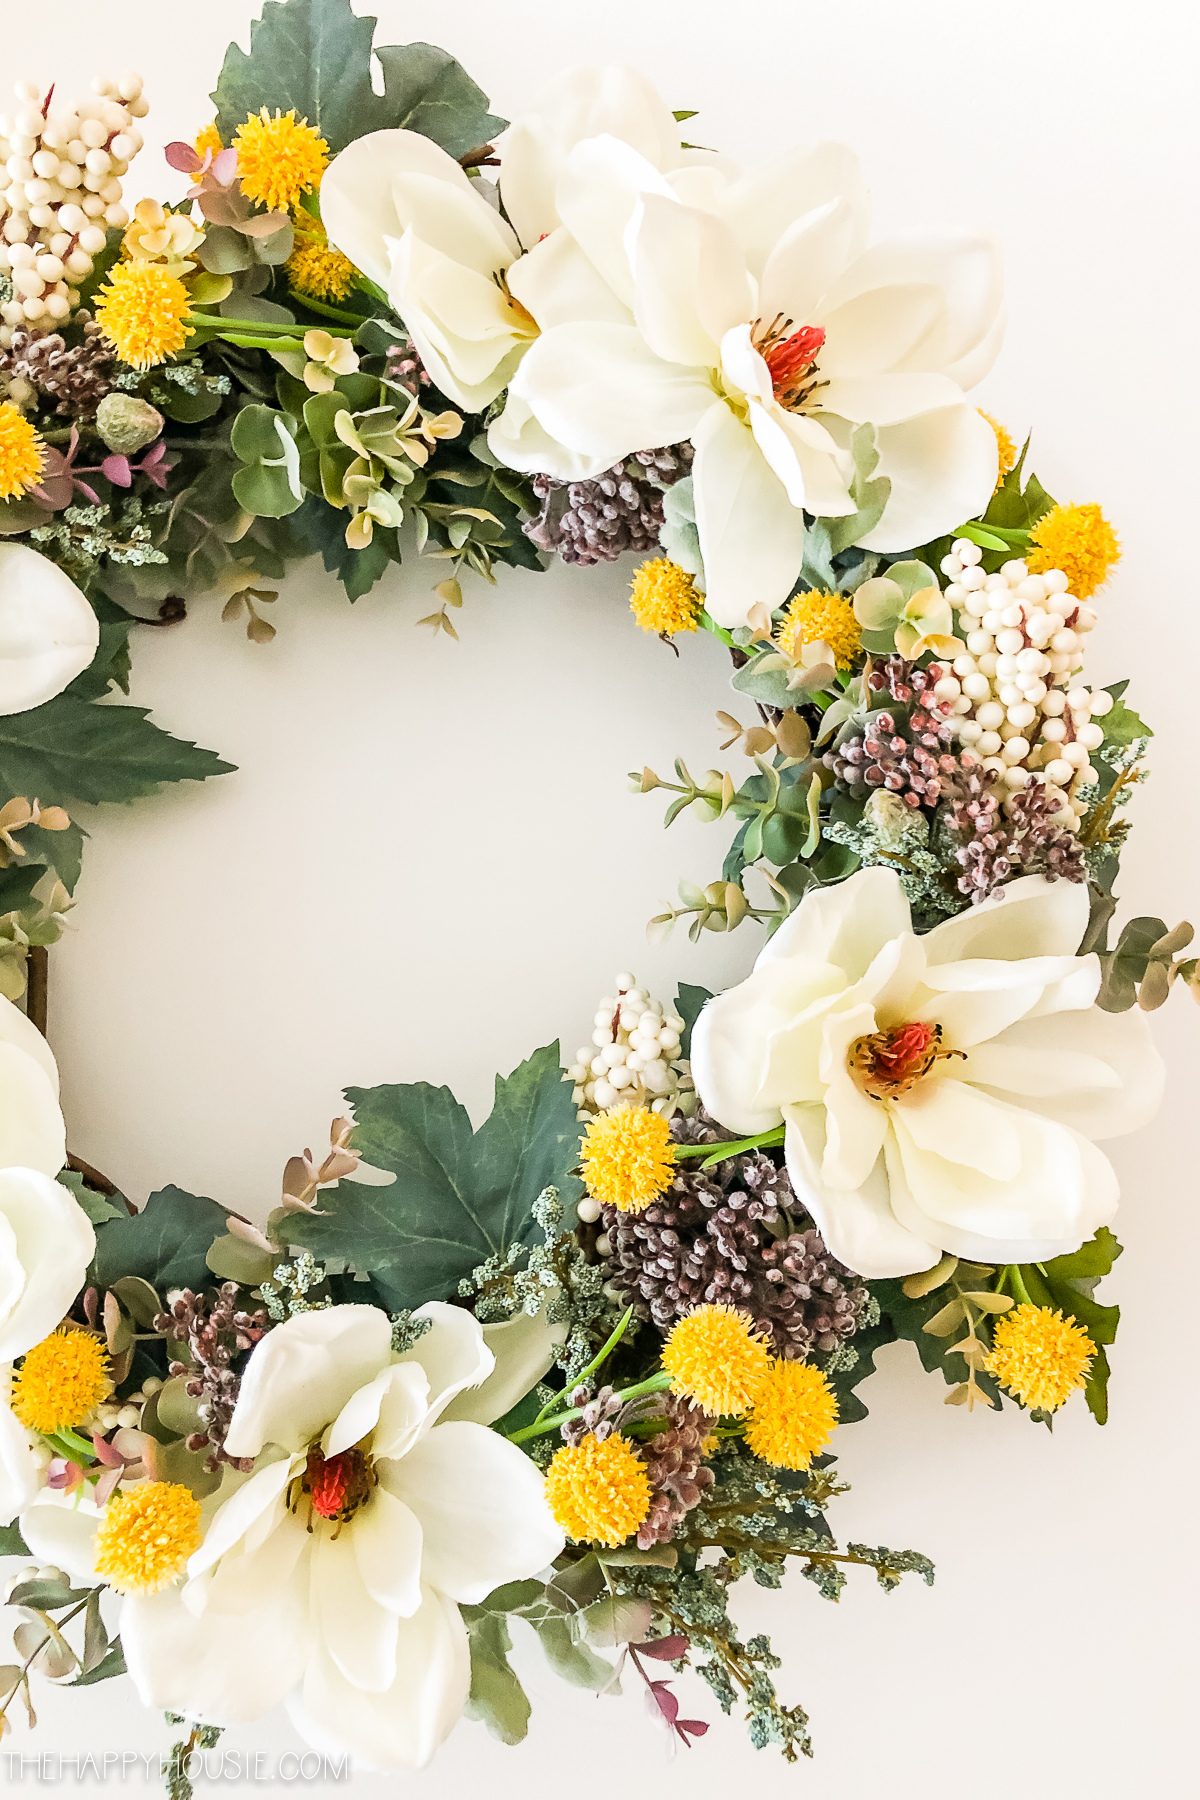 Showing the white flowers with the red centers of the wreath.